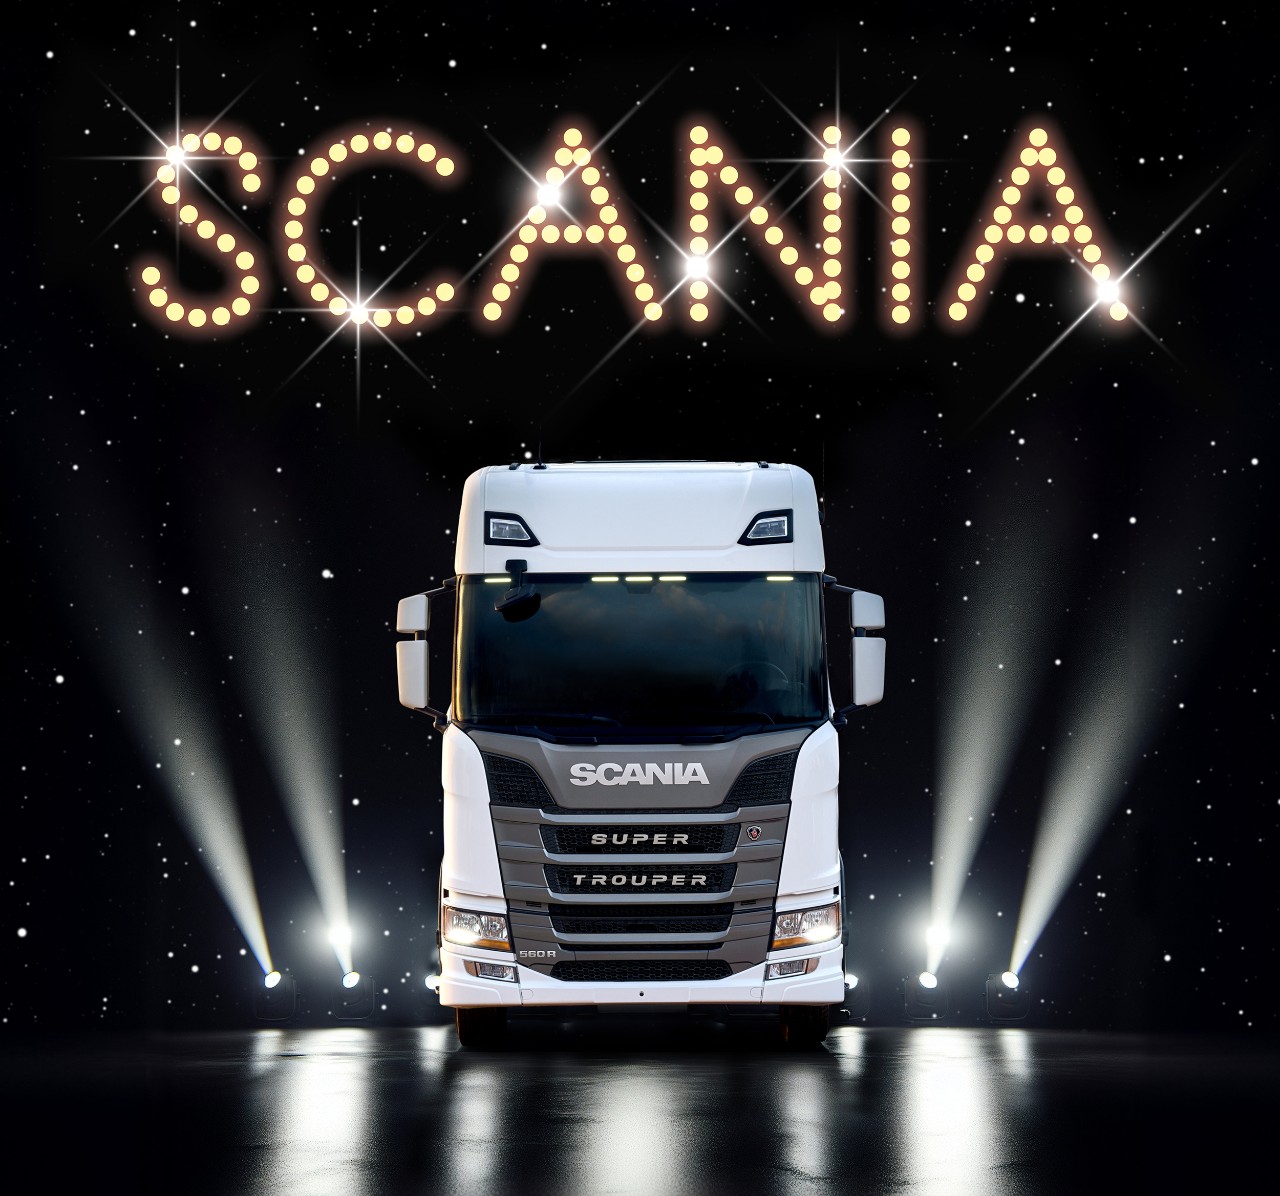 Scania SuperTrouper on stage with Scania in lights